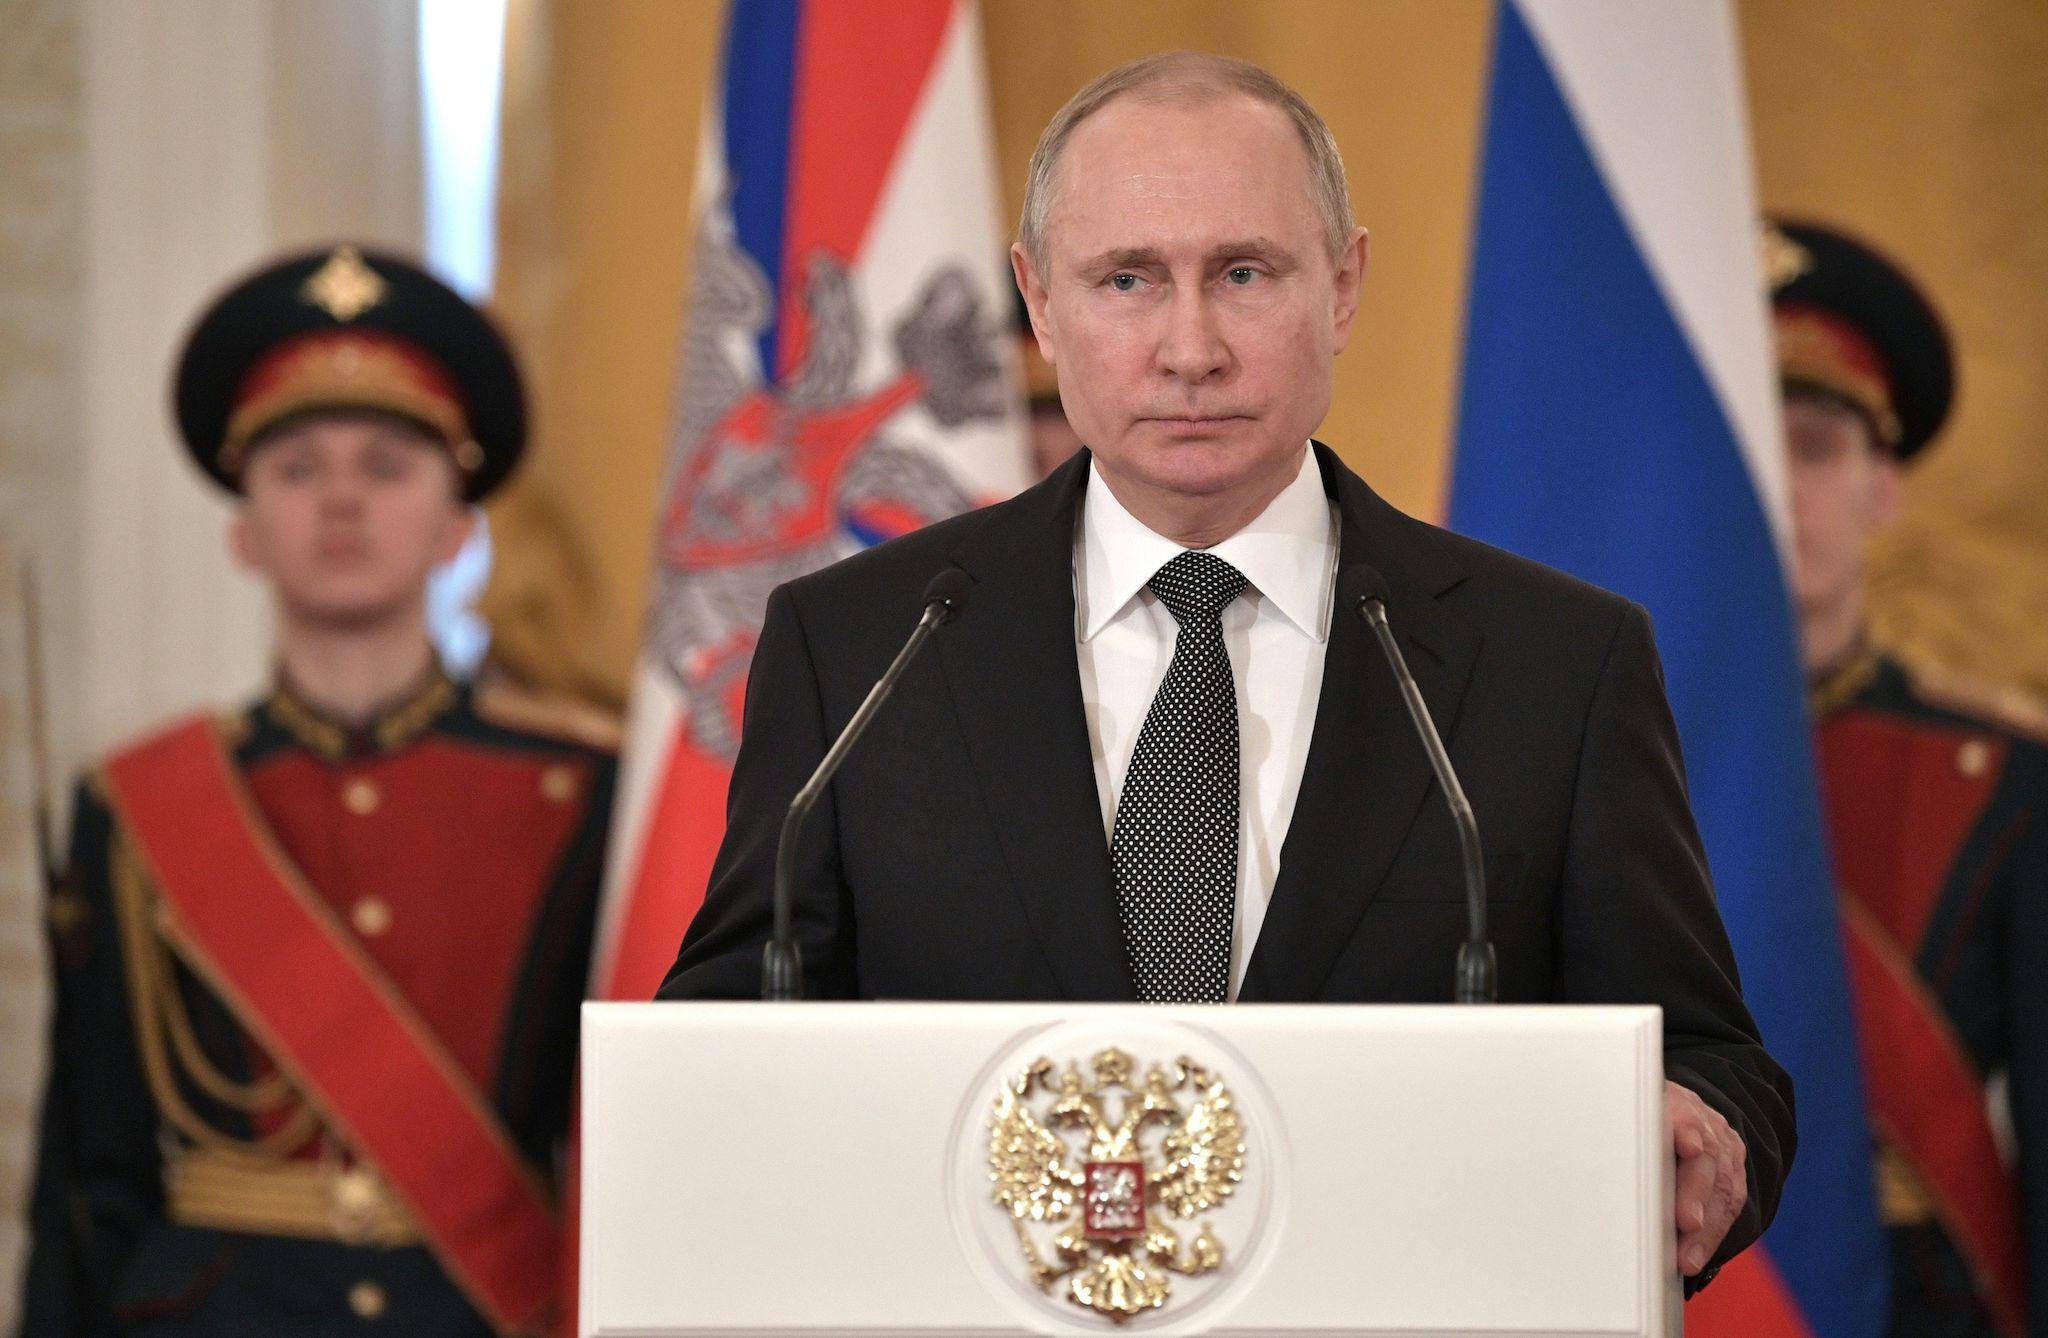 Russian President Vladimir Putin (C) delivers a speech during a ceremony to present national award and to mark the Defender of the Fatherland Day at the Kremlin